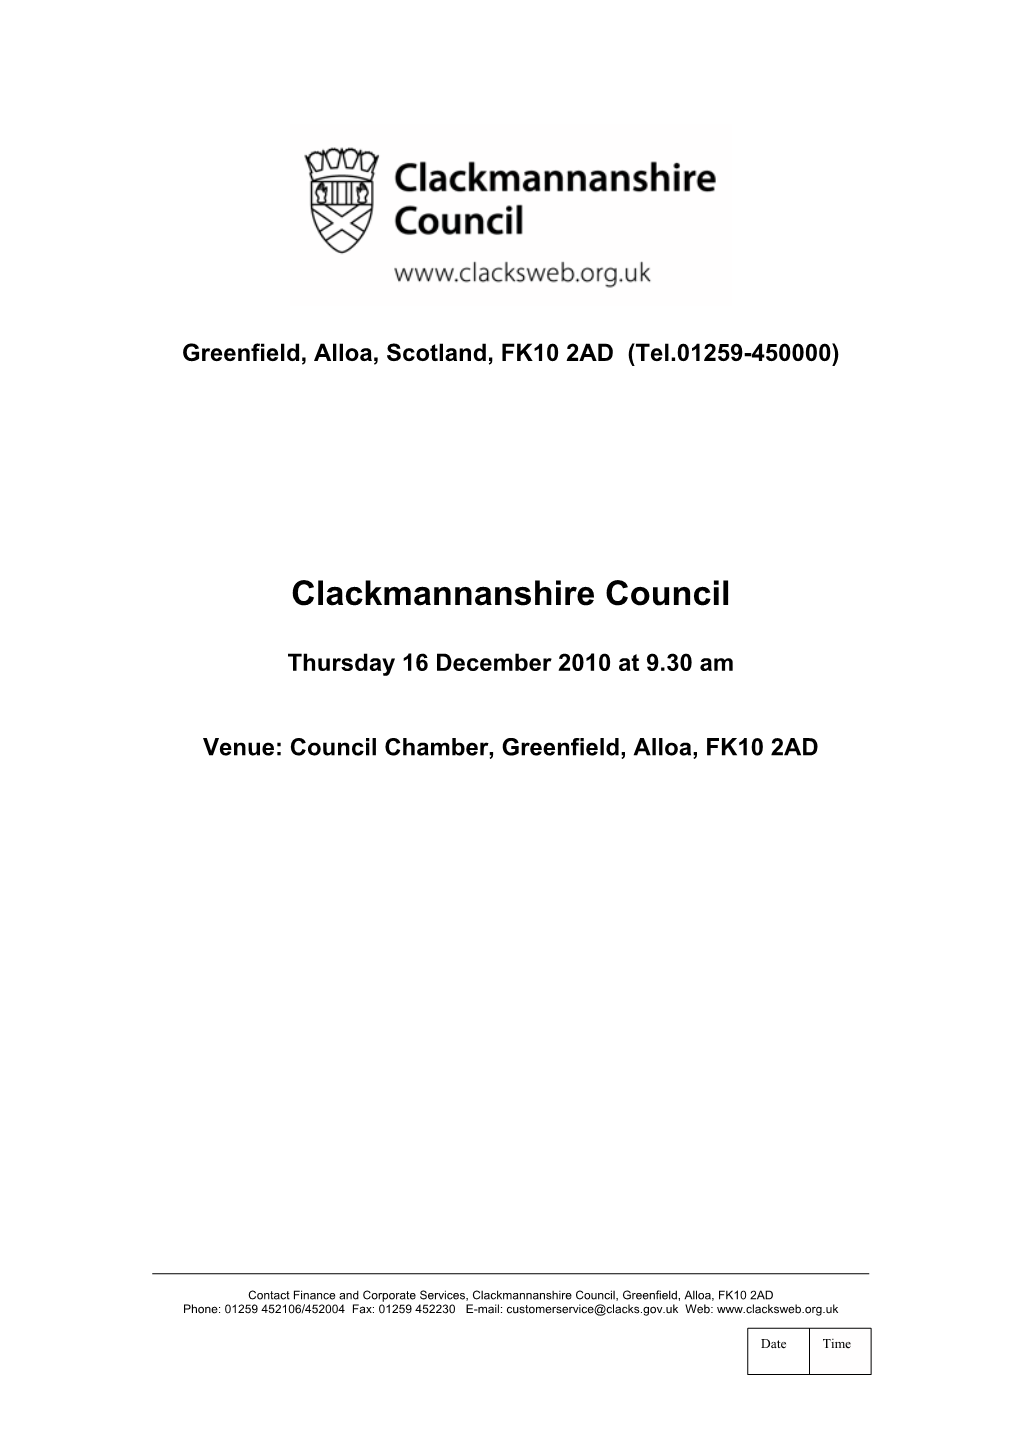 Agenda for Council Meeting 16-12-10